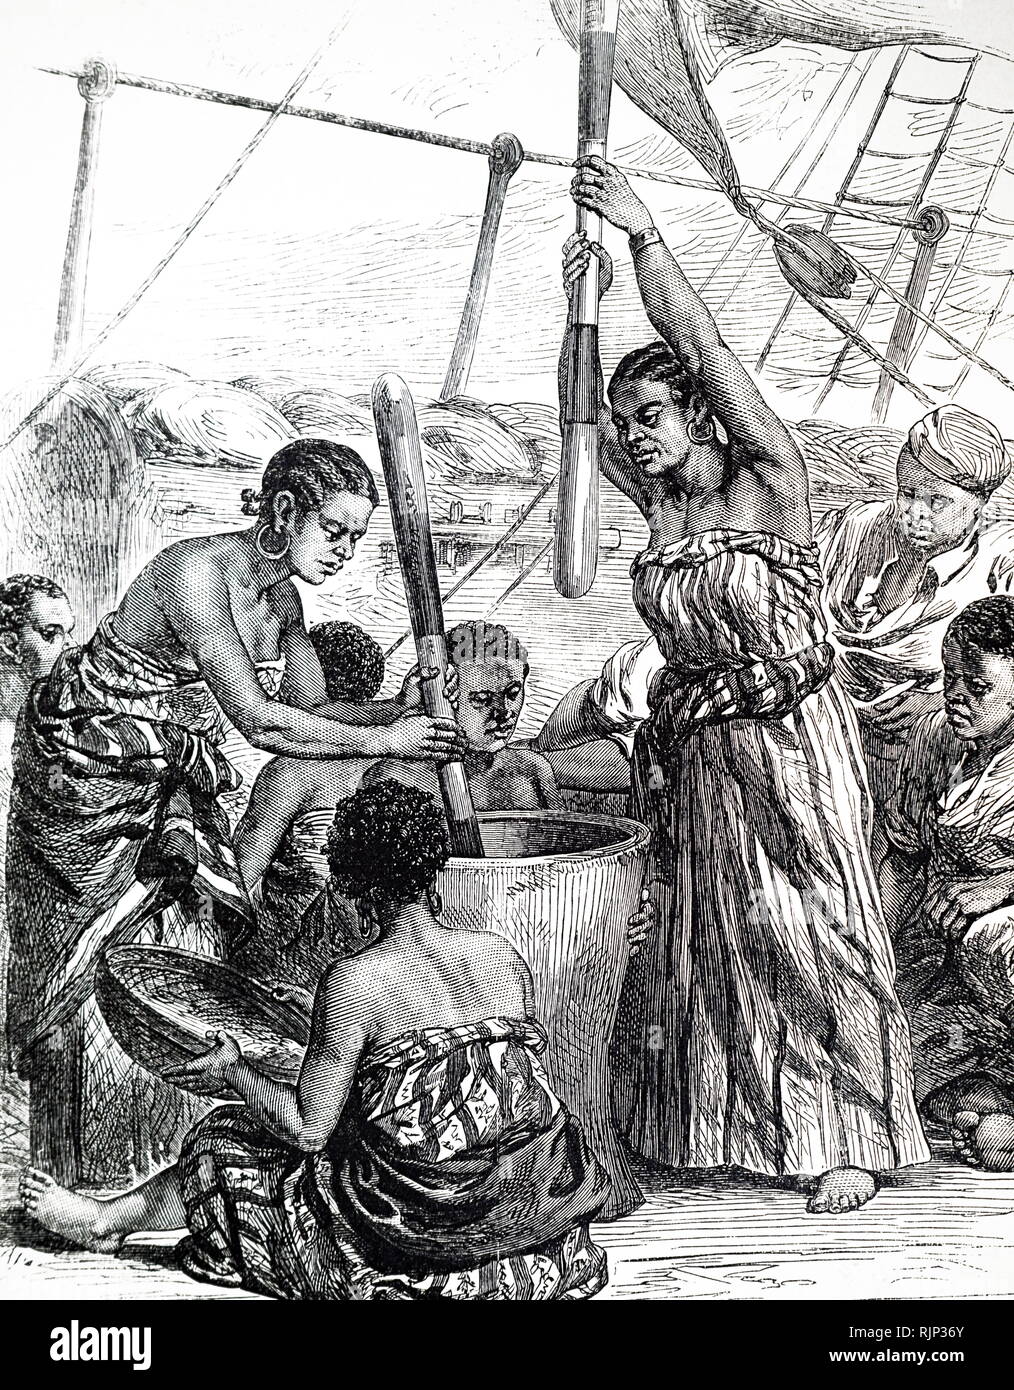 An engraving depicting East African women pounding millet on board the HMS Lynx after being freed from slavery. Dated 19th century Stock Photo